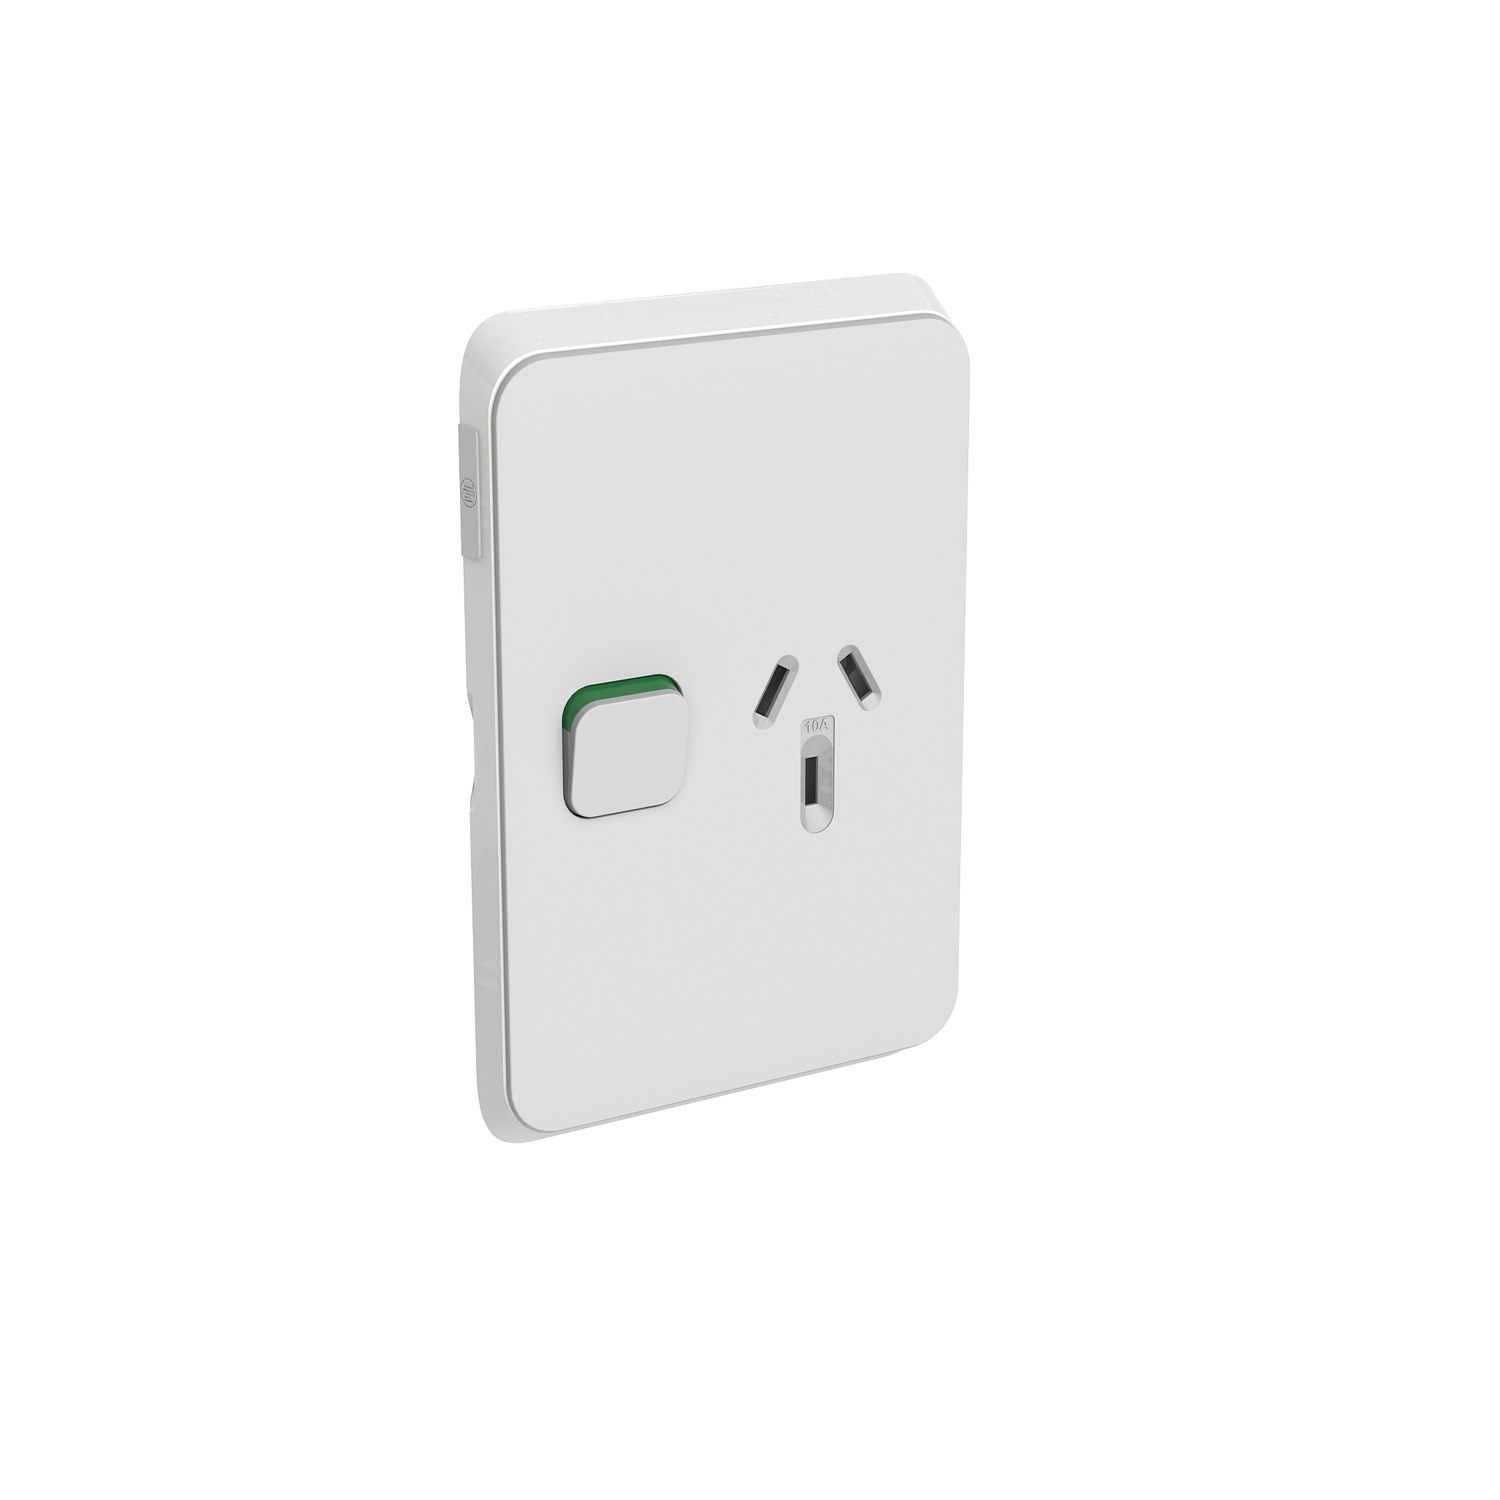 PDL Iconic - Cover Plate Switched Socket 10A Vertical - Cool Grey